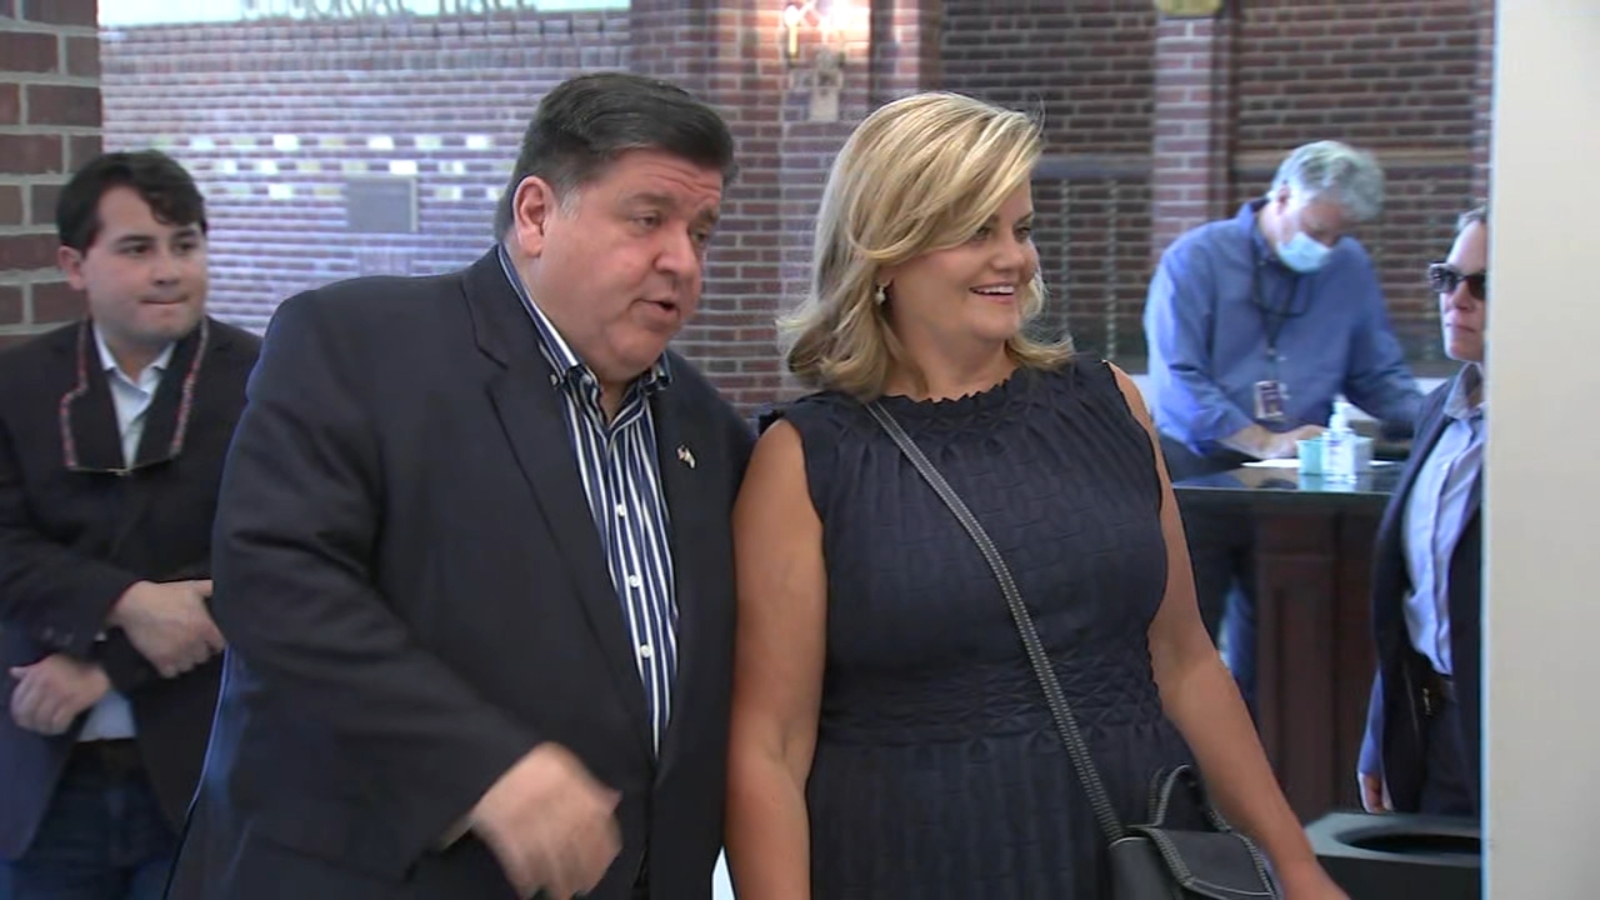 Illinois primary 2022: Governor JB Pritzker wins Democratic nomination for 2nd term over challenger Beverly Miles